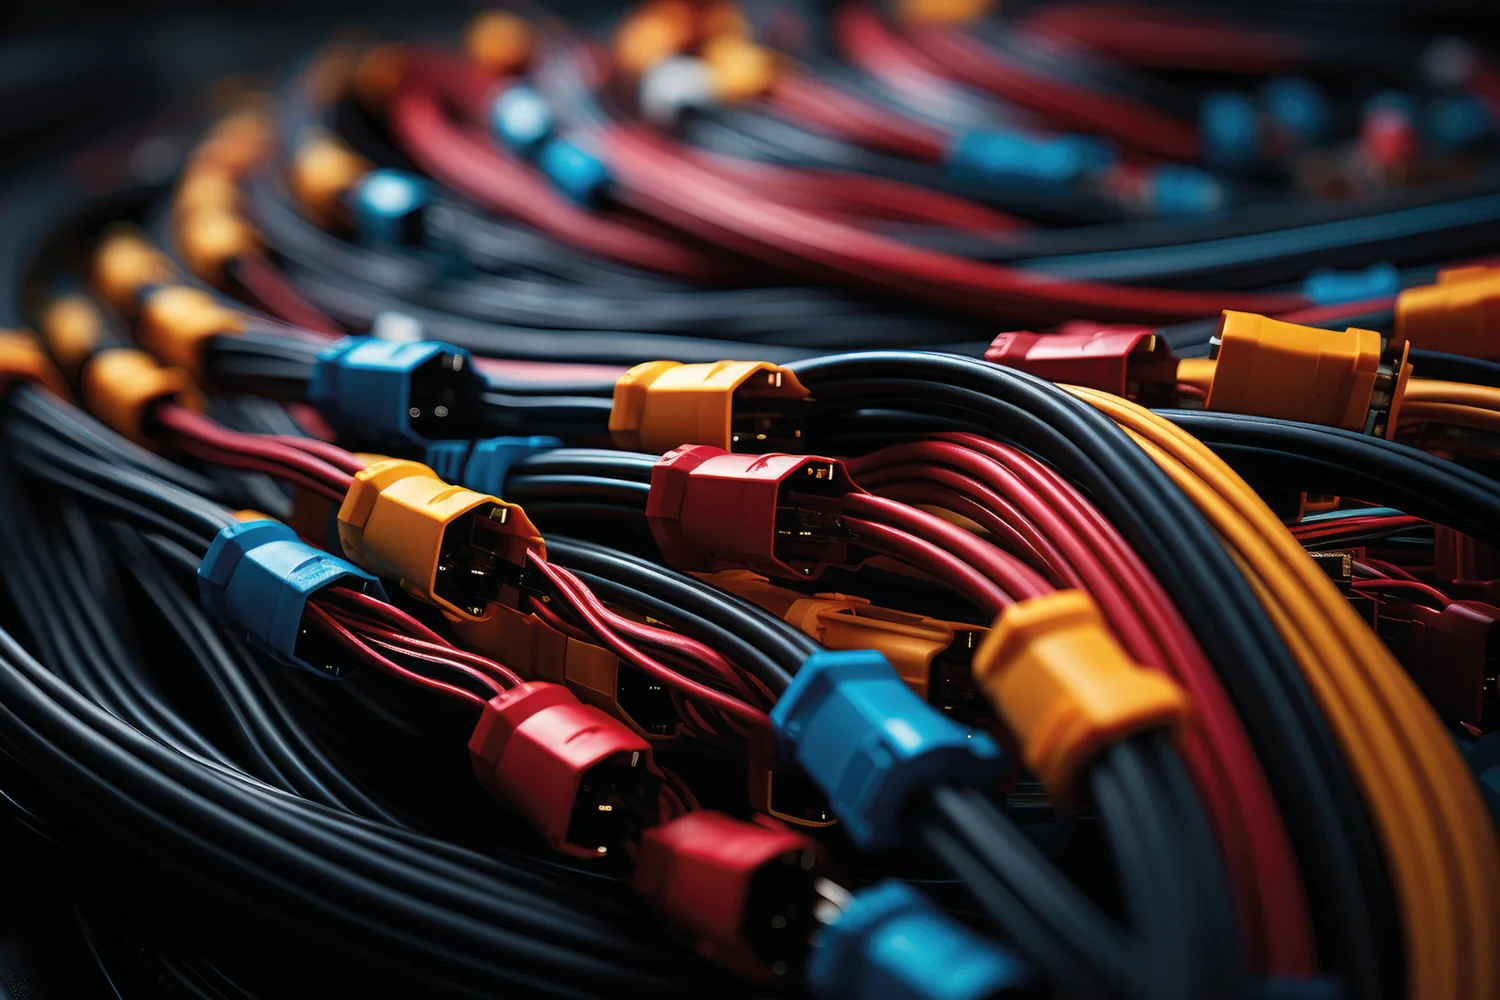 Example of possible applications of Crastin® PBT: Colorful wire harness and plastic connectors for vehicles, automotive industry and manufacturing. @Didiksaputra/stock.adobe.com